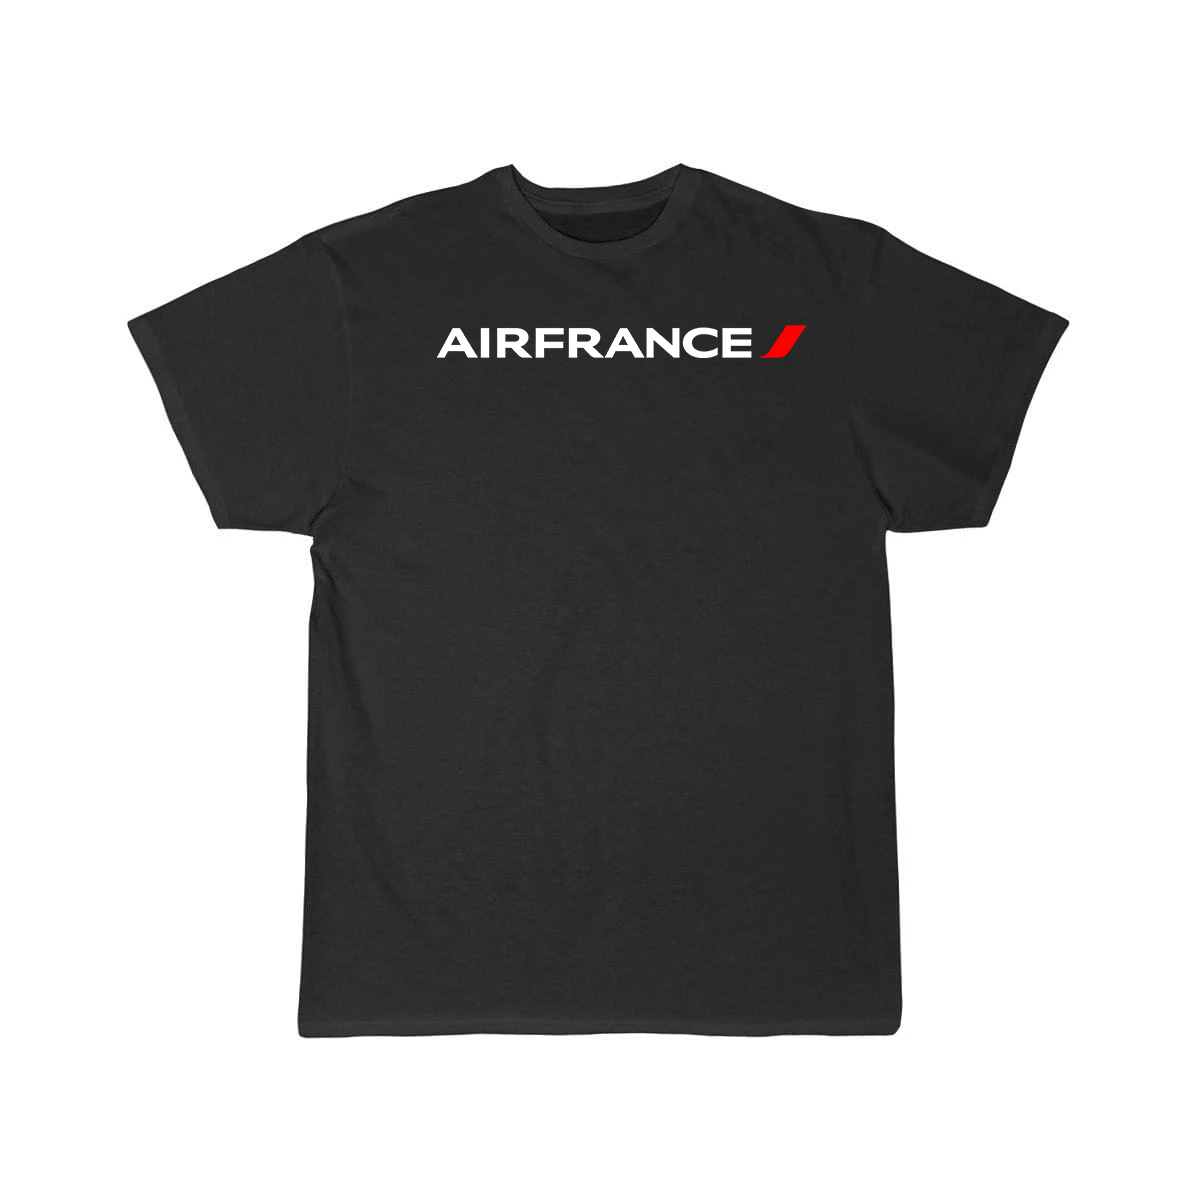 FRANCE AIRLINE T-SHIRT